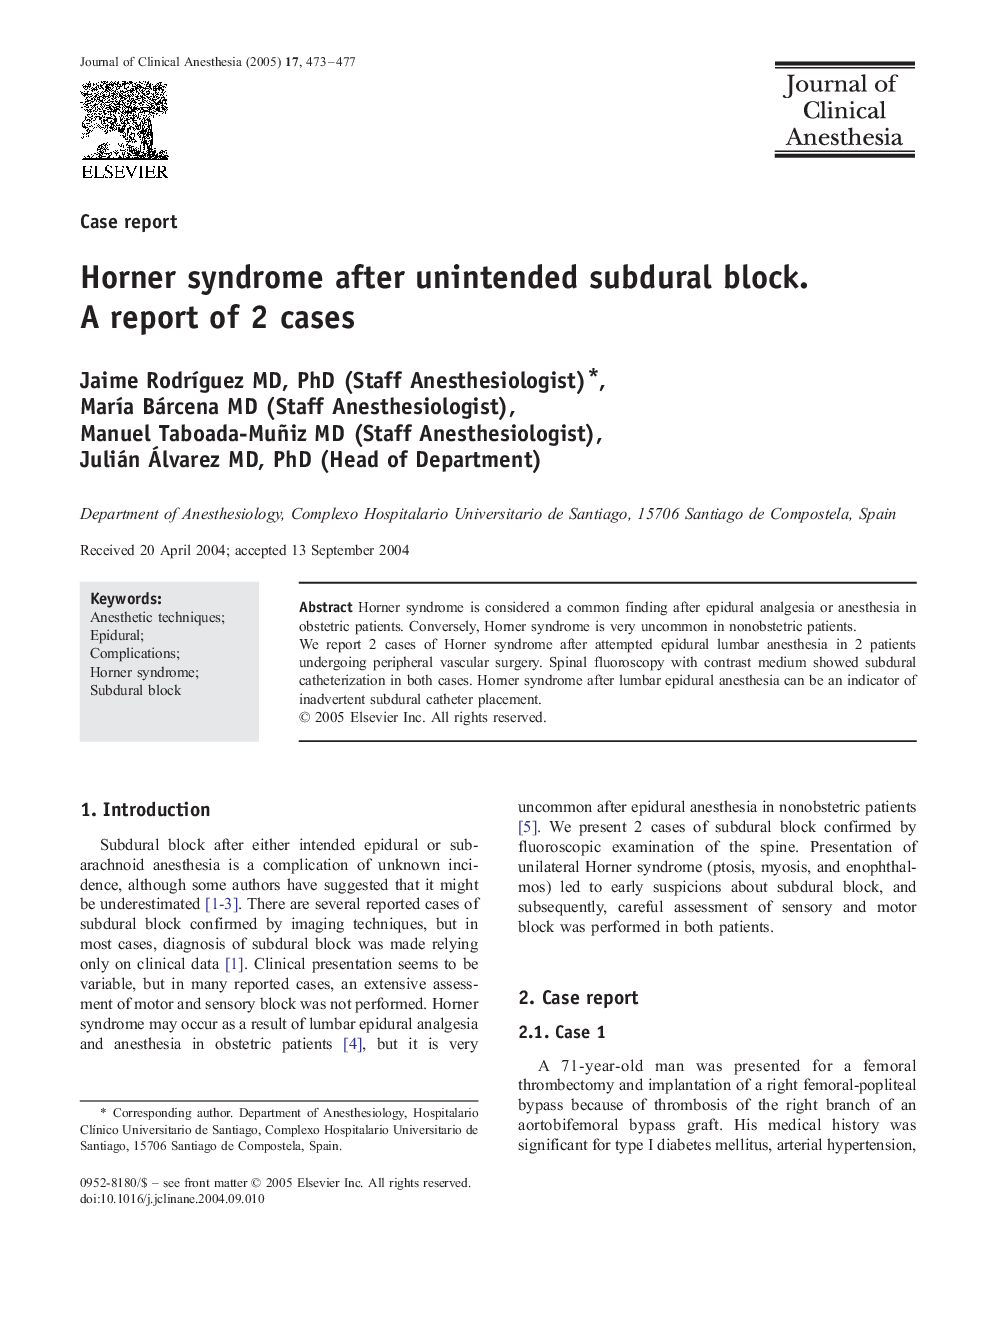 Horner syndrome after unintended subdural block. A report of 2 cases